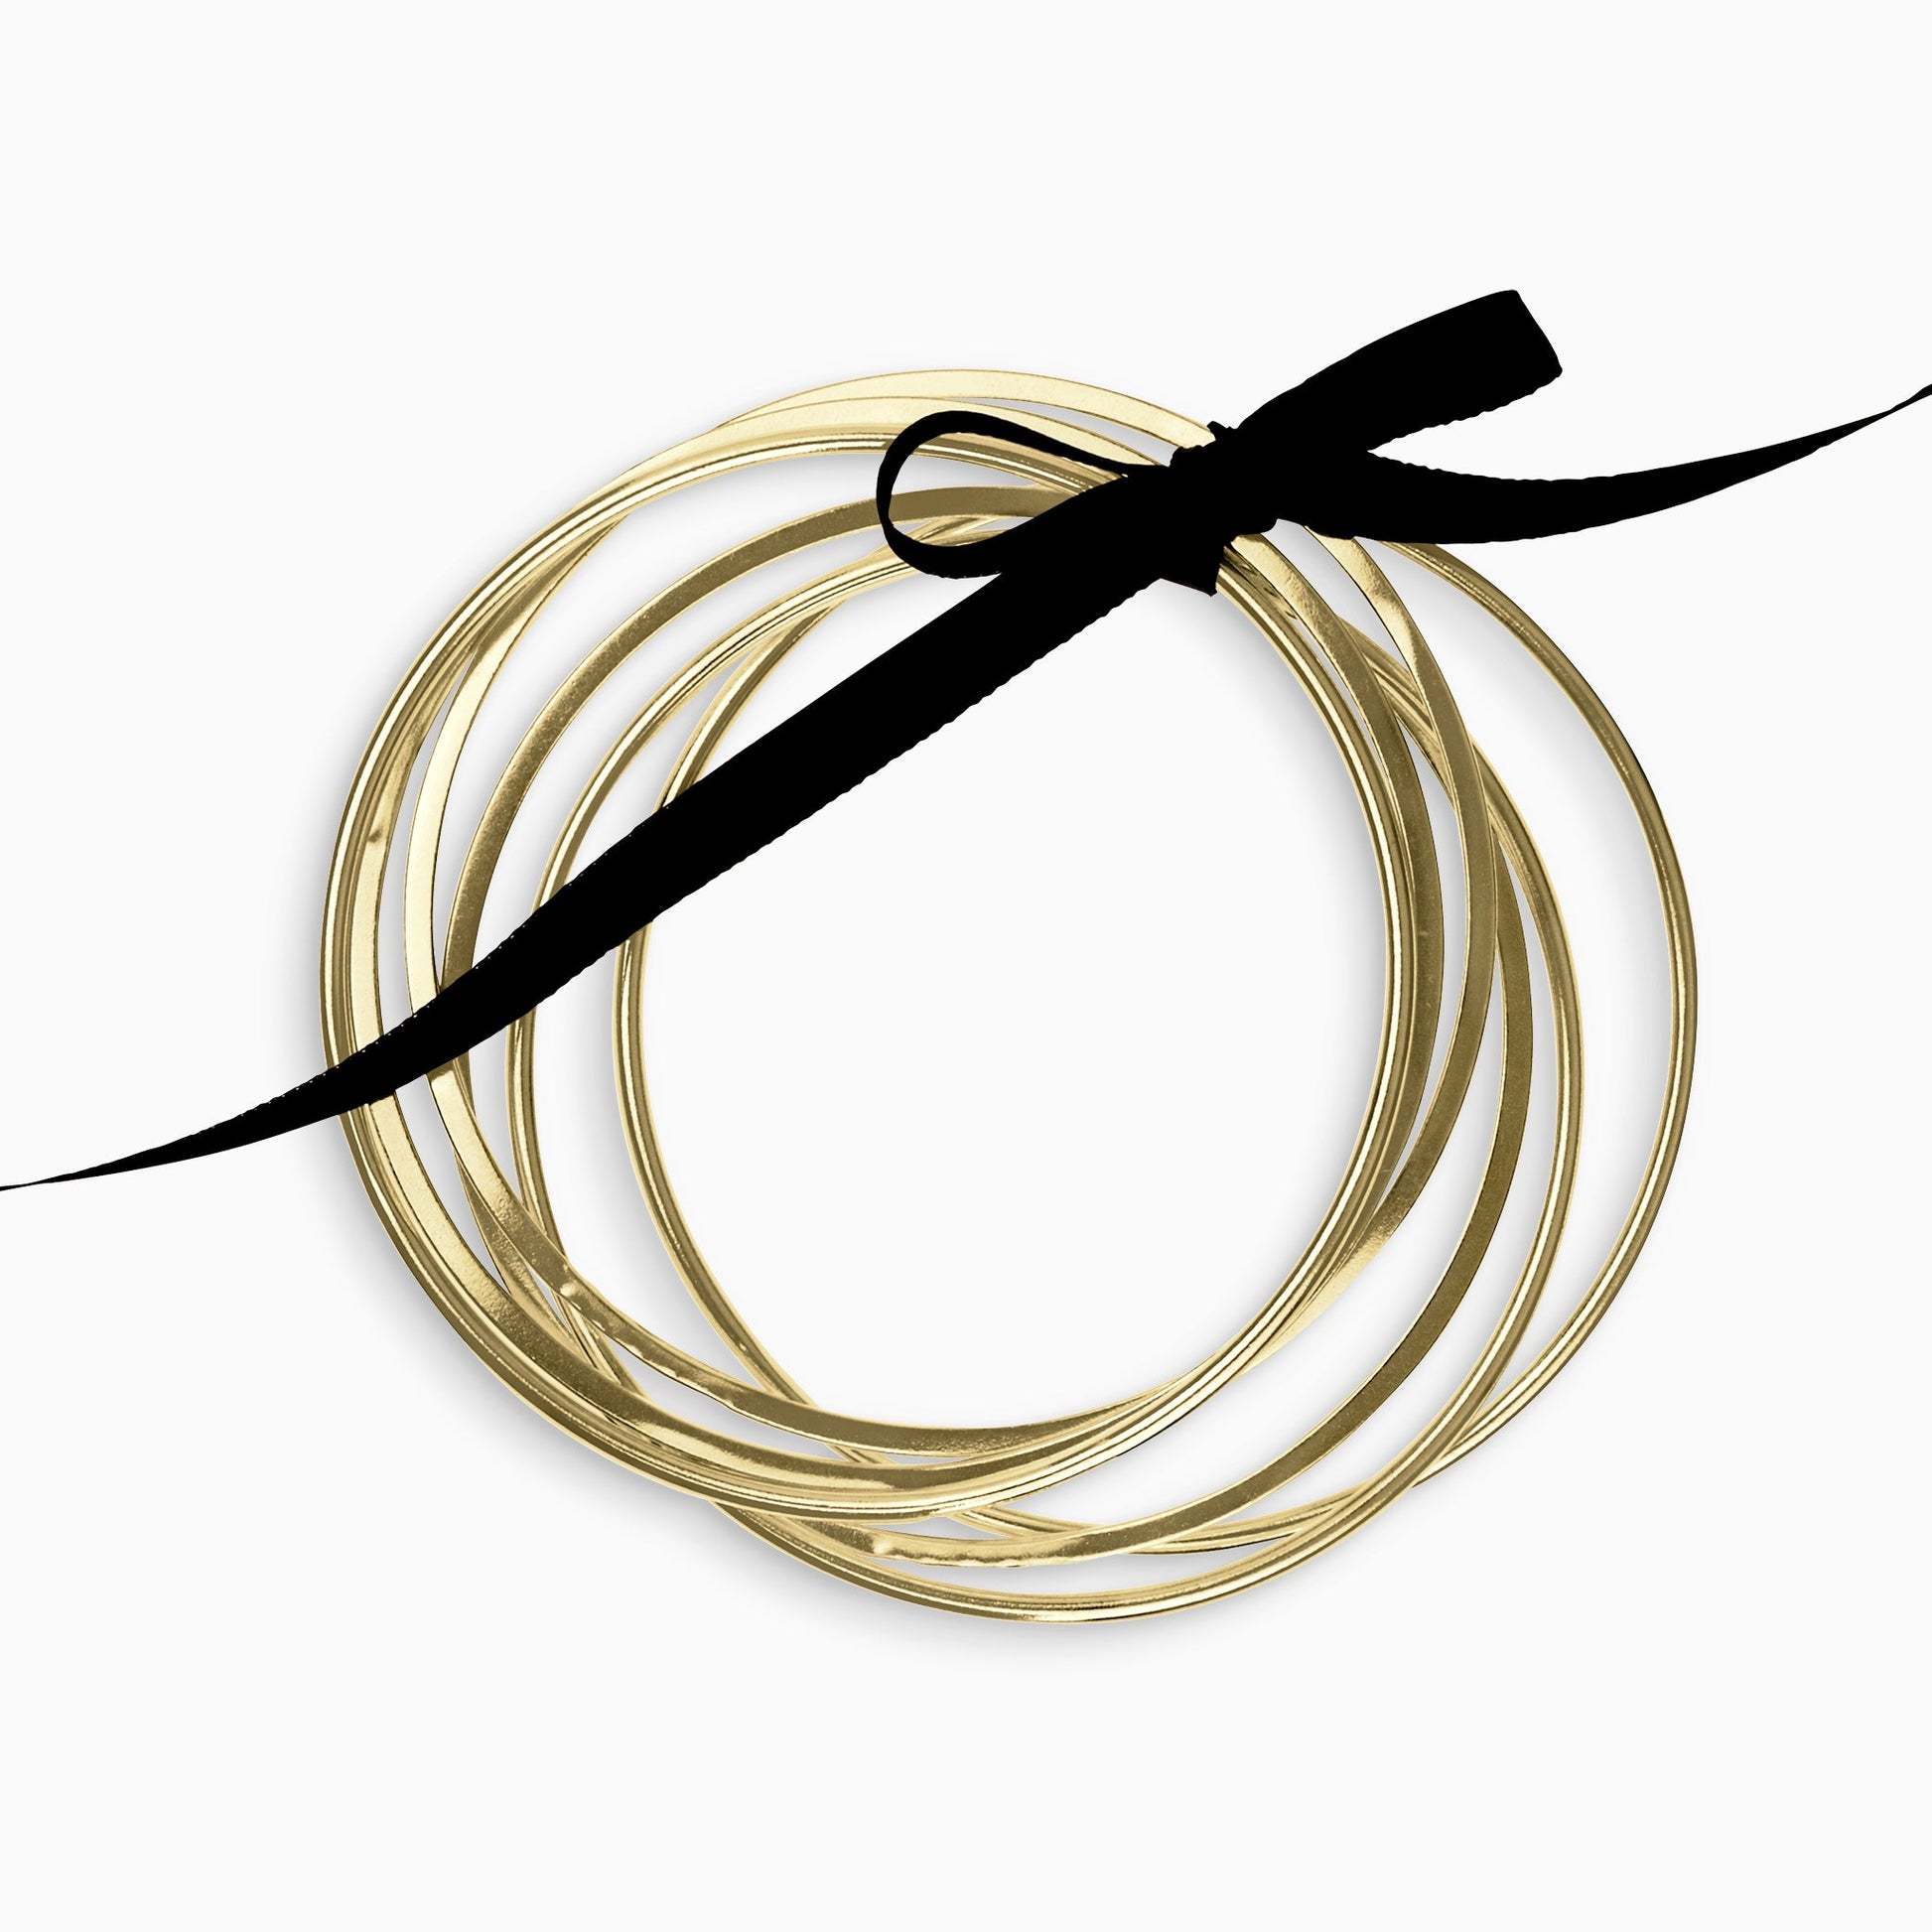 A set of 6 18ct Fairtrade yellow gold bangles of 2mm wire, 3 x round undulating section and 3 x square undulating section. 63mm inside diameter.